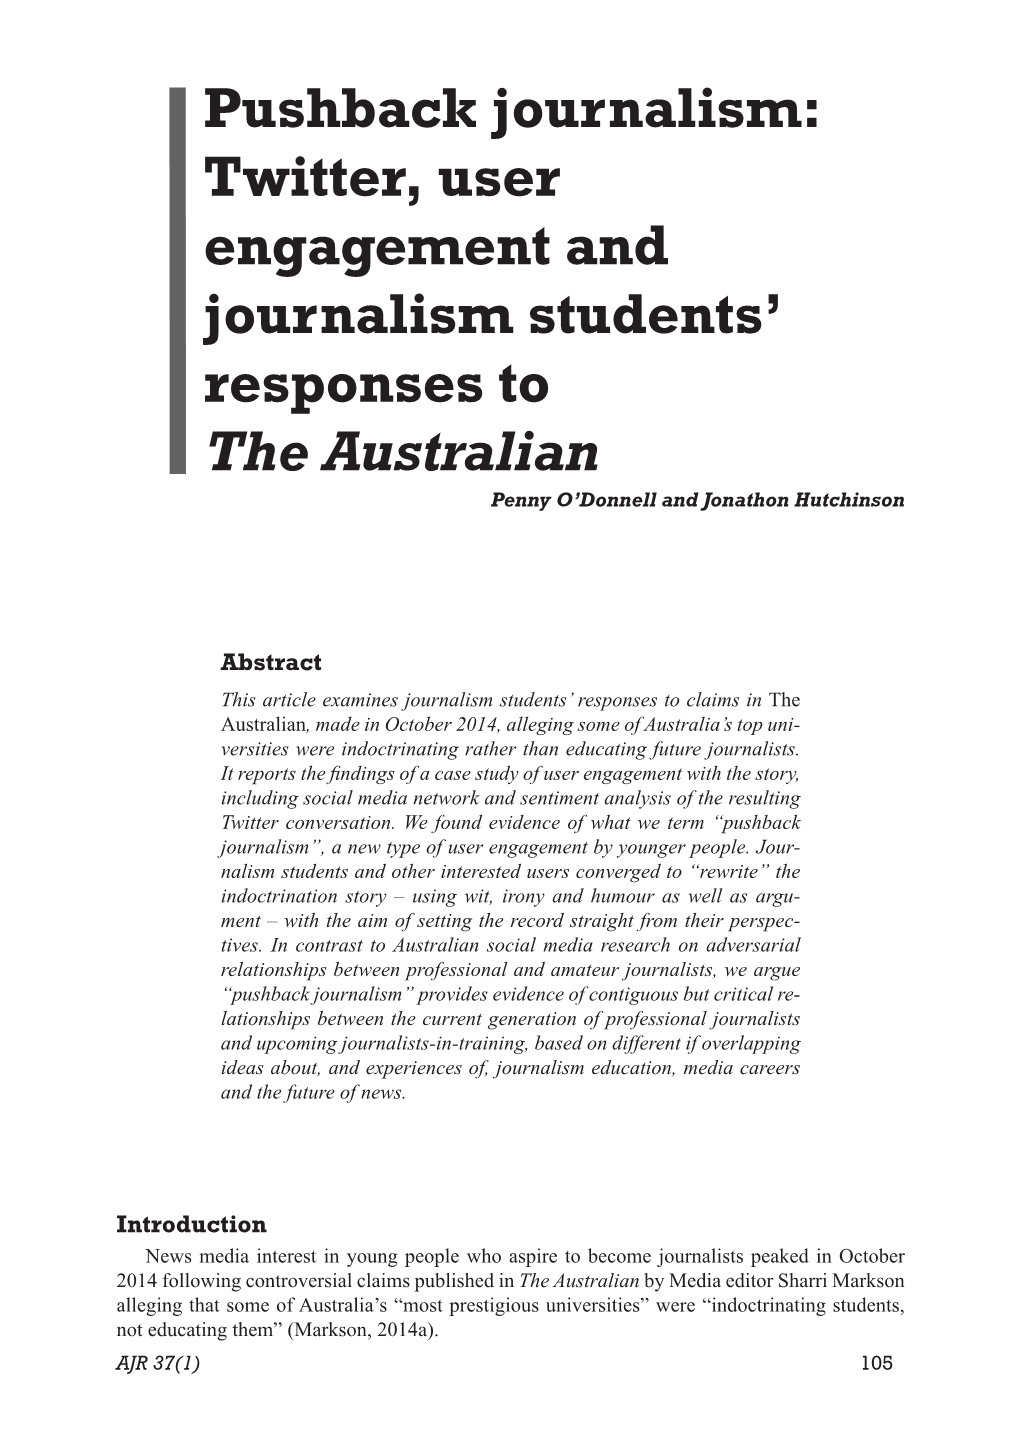 Pushback Journalism: Twitter, User Engagement and Journalism Students’ Responses to the Australian Penny O’Donnell and Jonathon Hutchinson